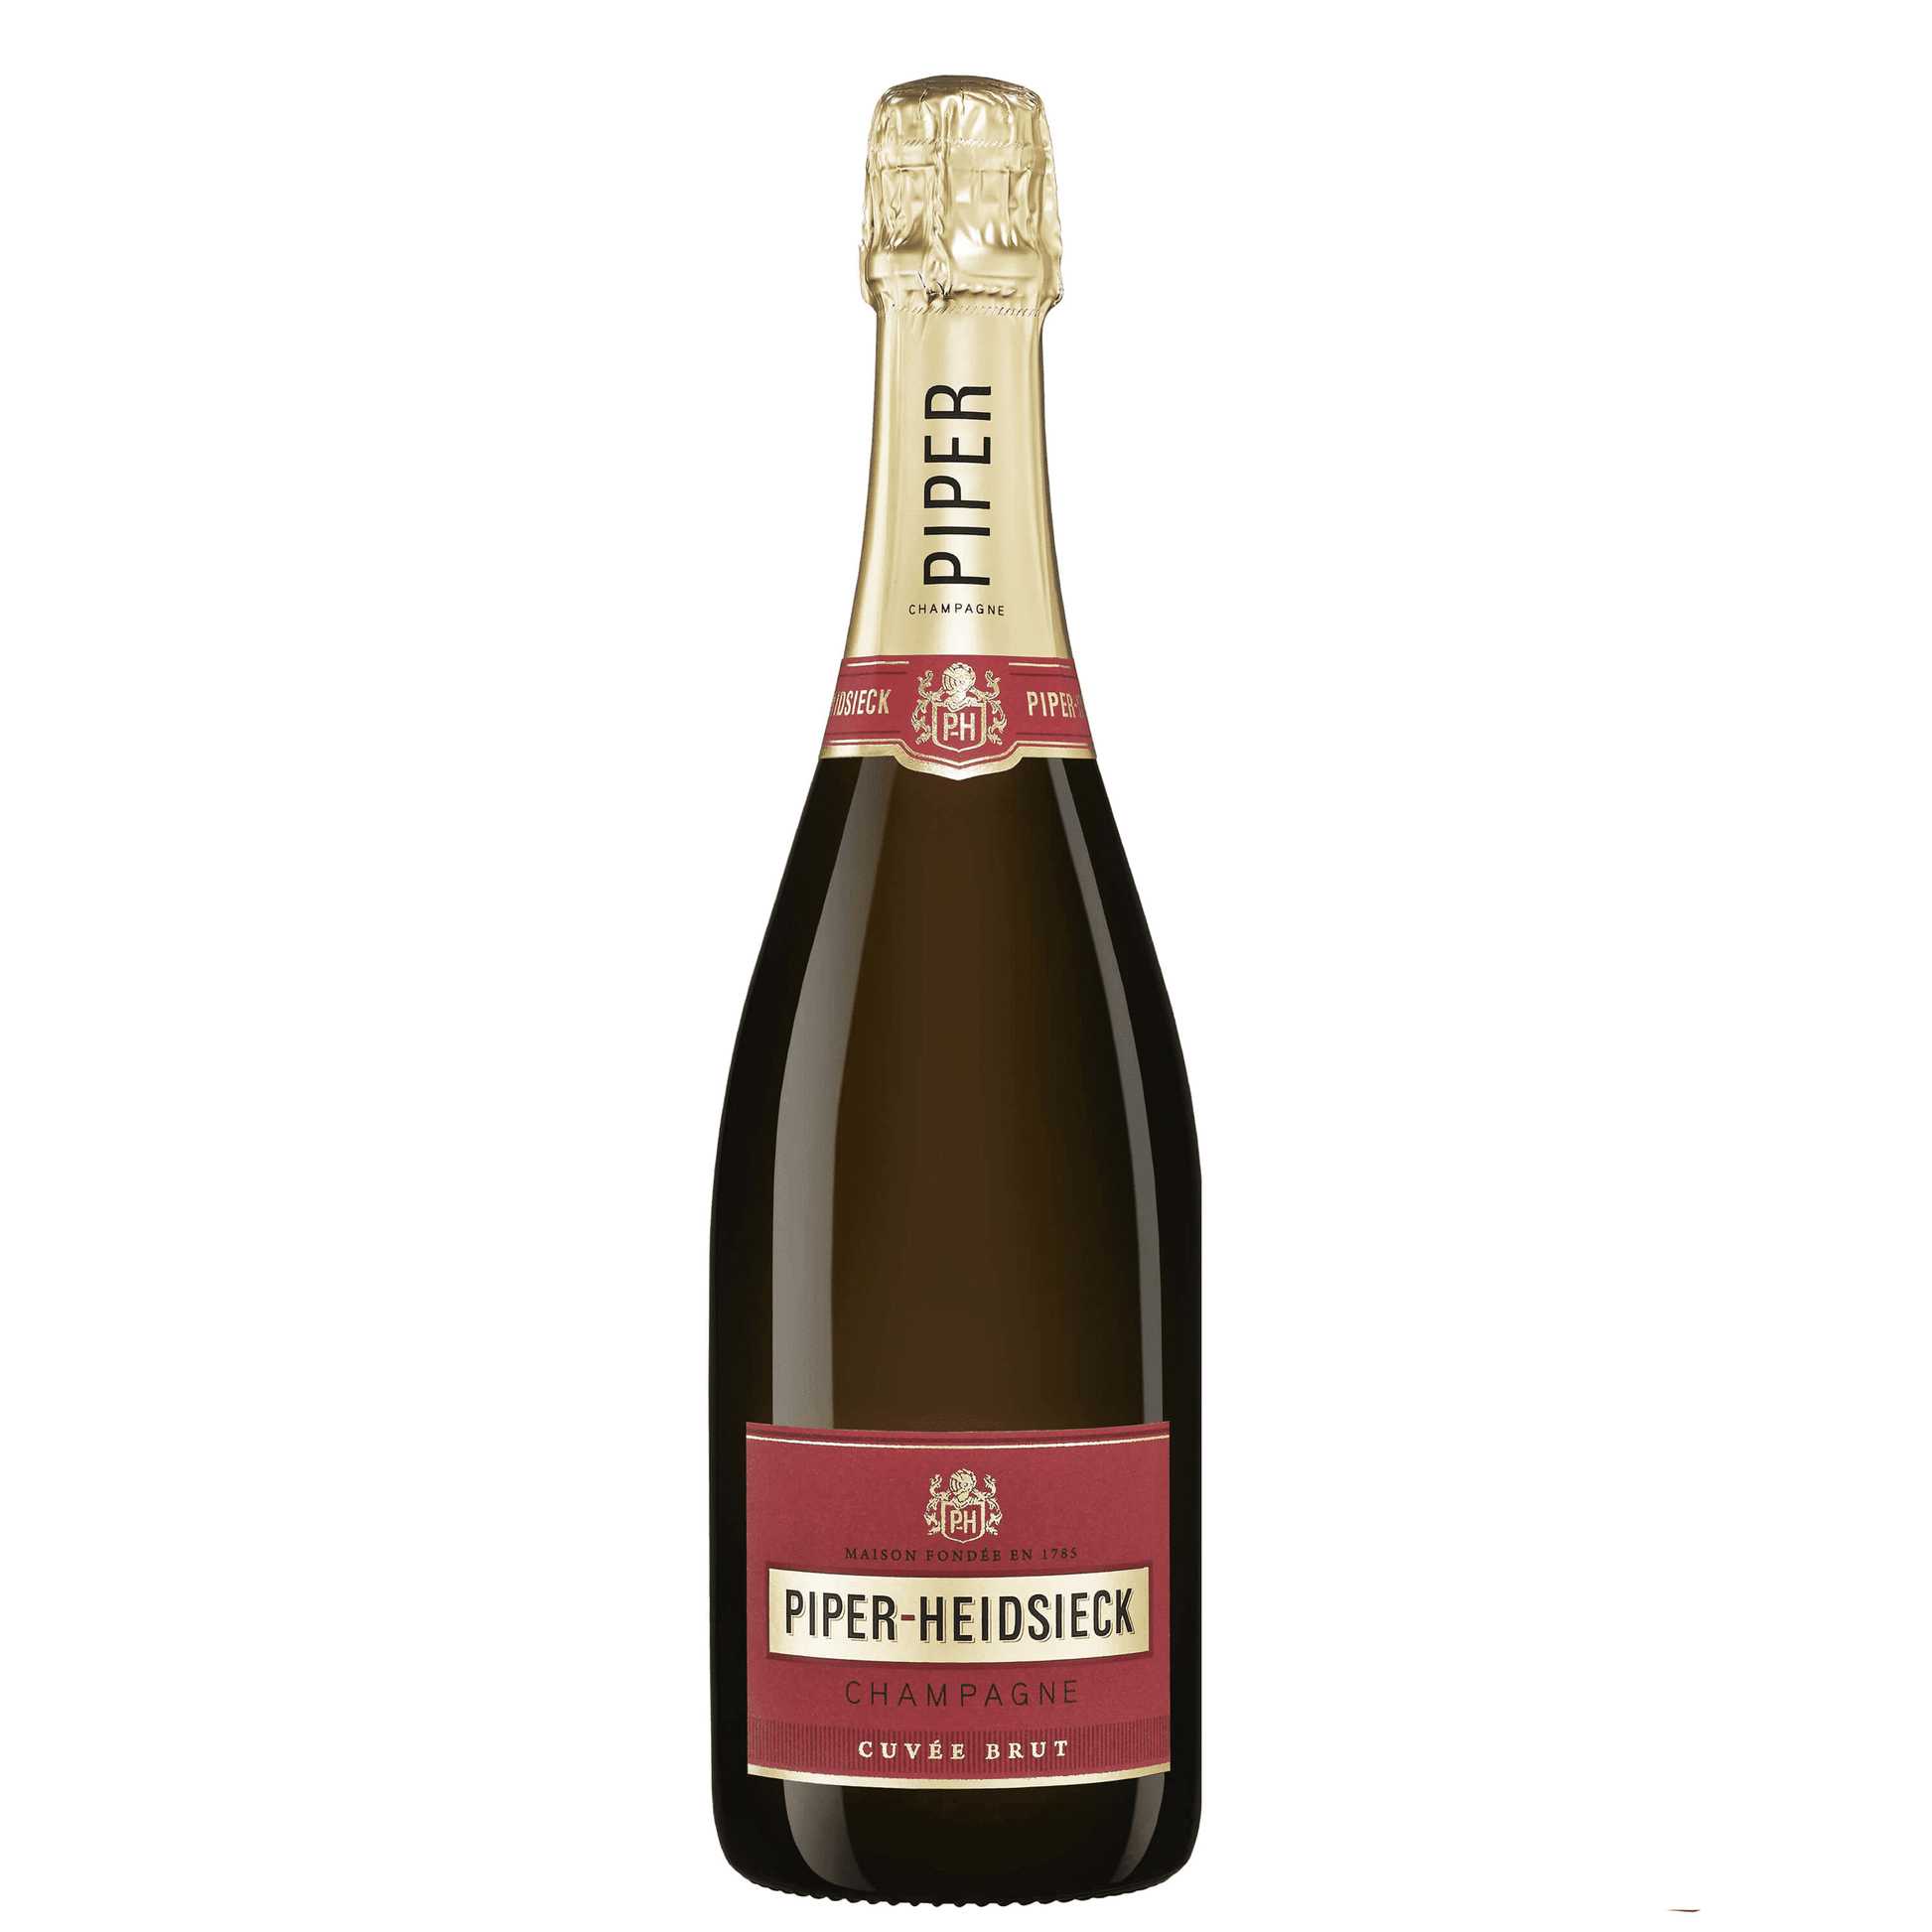 Piper Heidsieck Cuvee Brut NV-Champagne-3018334100003-Fountainhall Wines